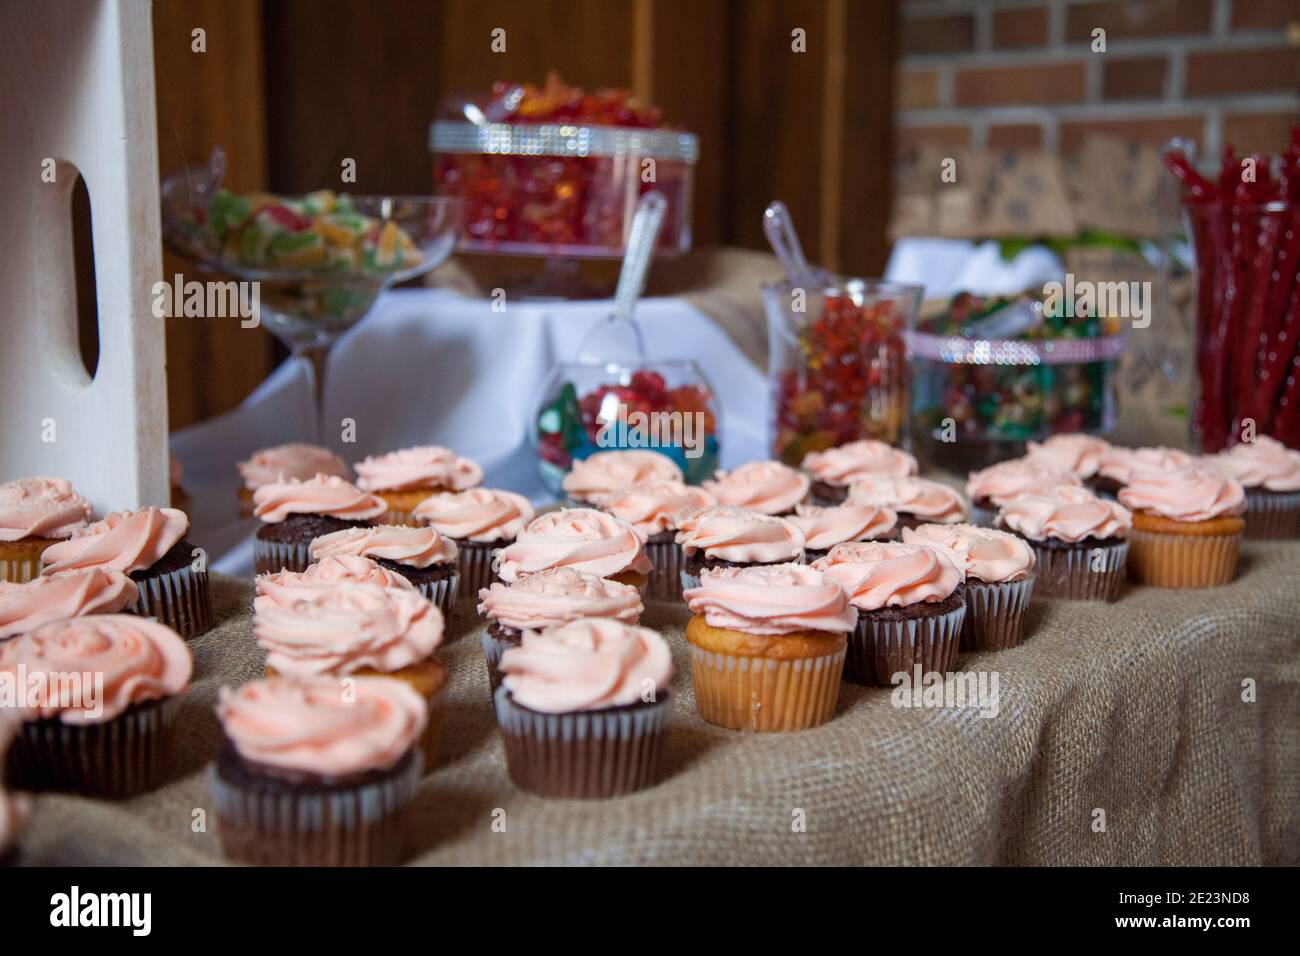 Pink frosted vanilla and chocolate cupcakes sit on a table cloth of burlap with other candies in the background as a dessert table for a wedding. Stock Photo